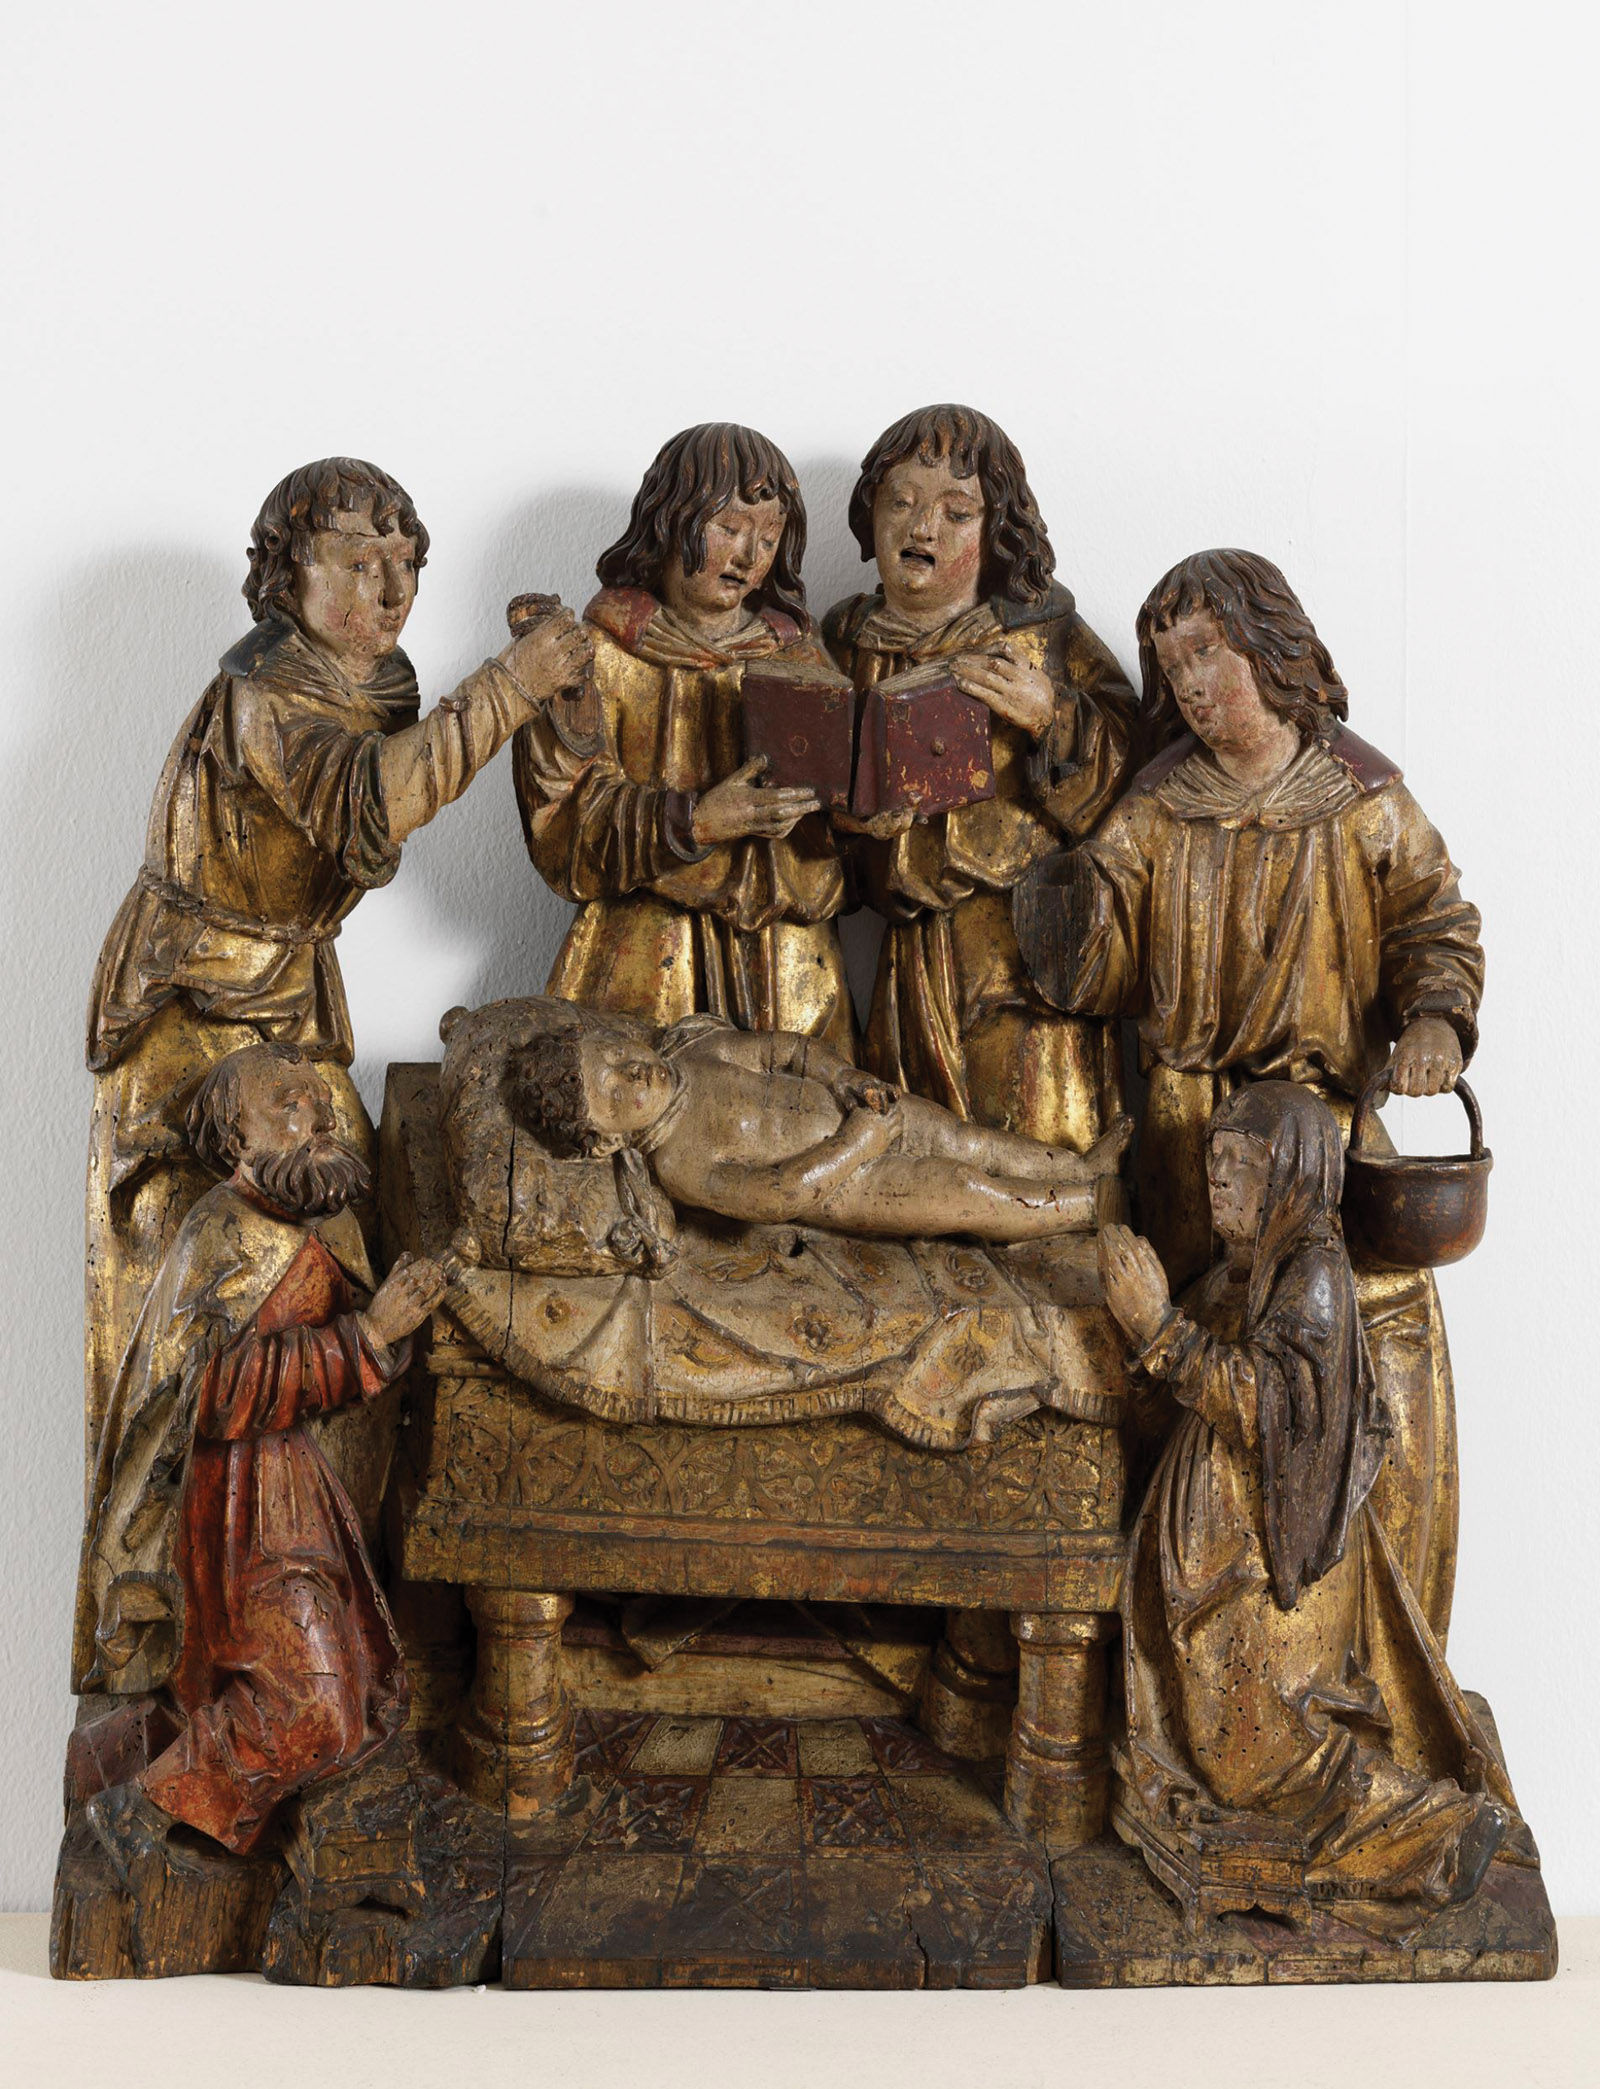 Wood carving of lamentation over the body of Simon of Trent